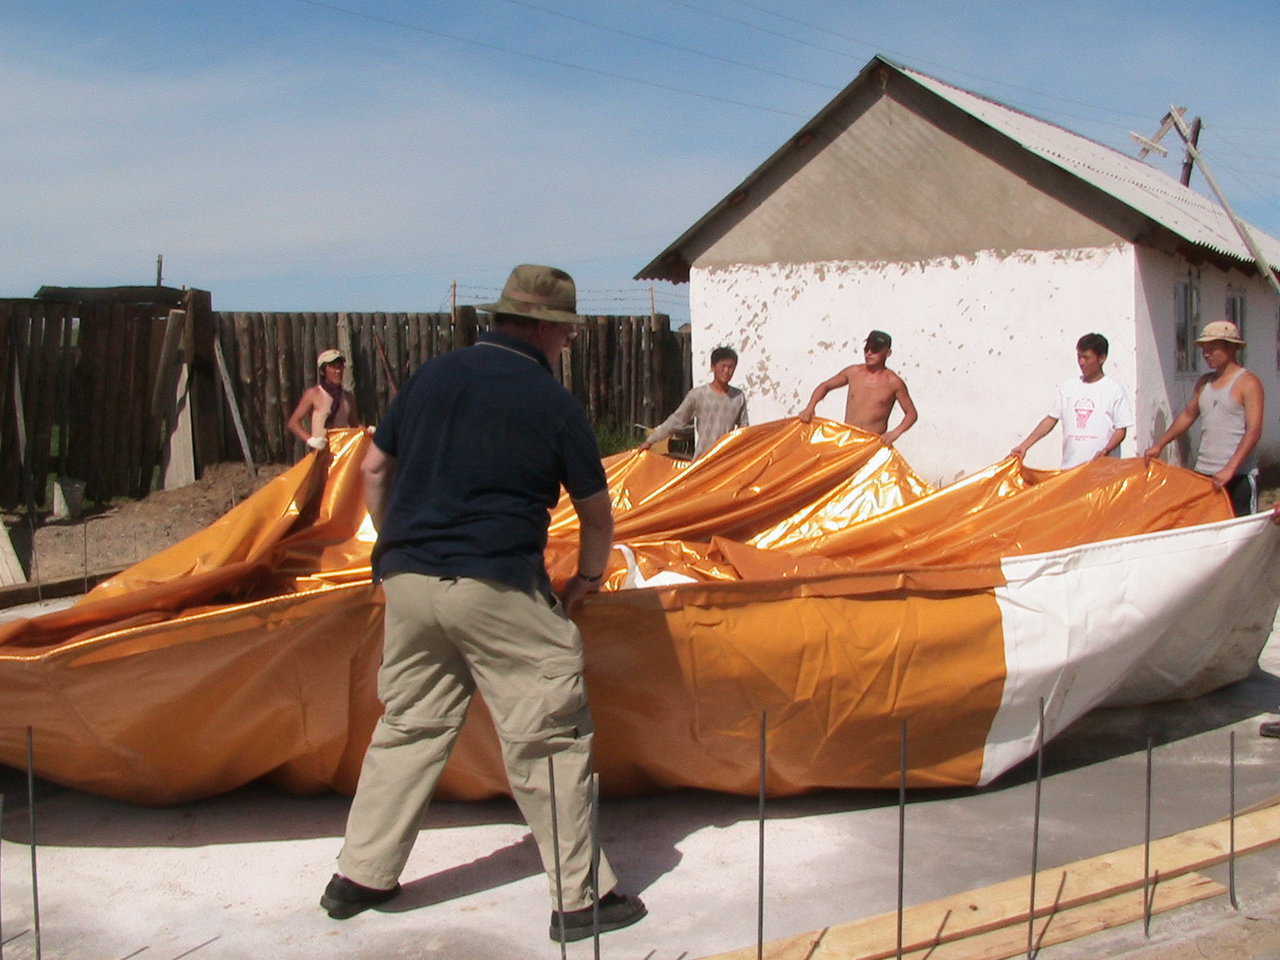 Spreading — A crew readies the Airform for inflation by spreading it out.